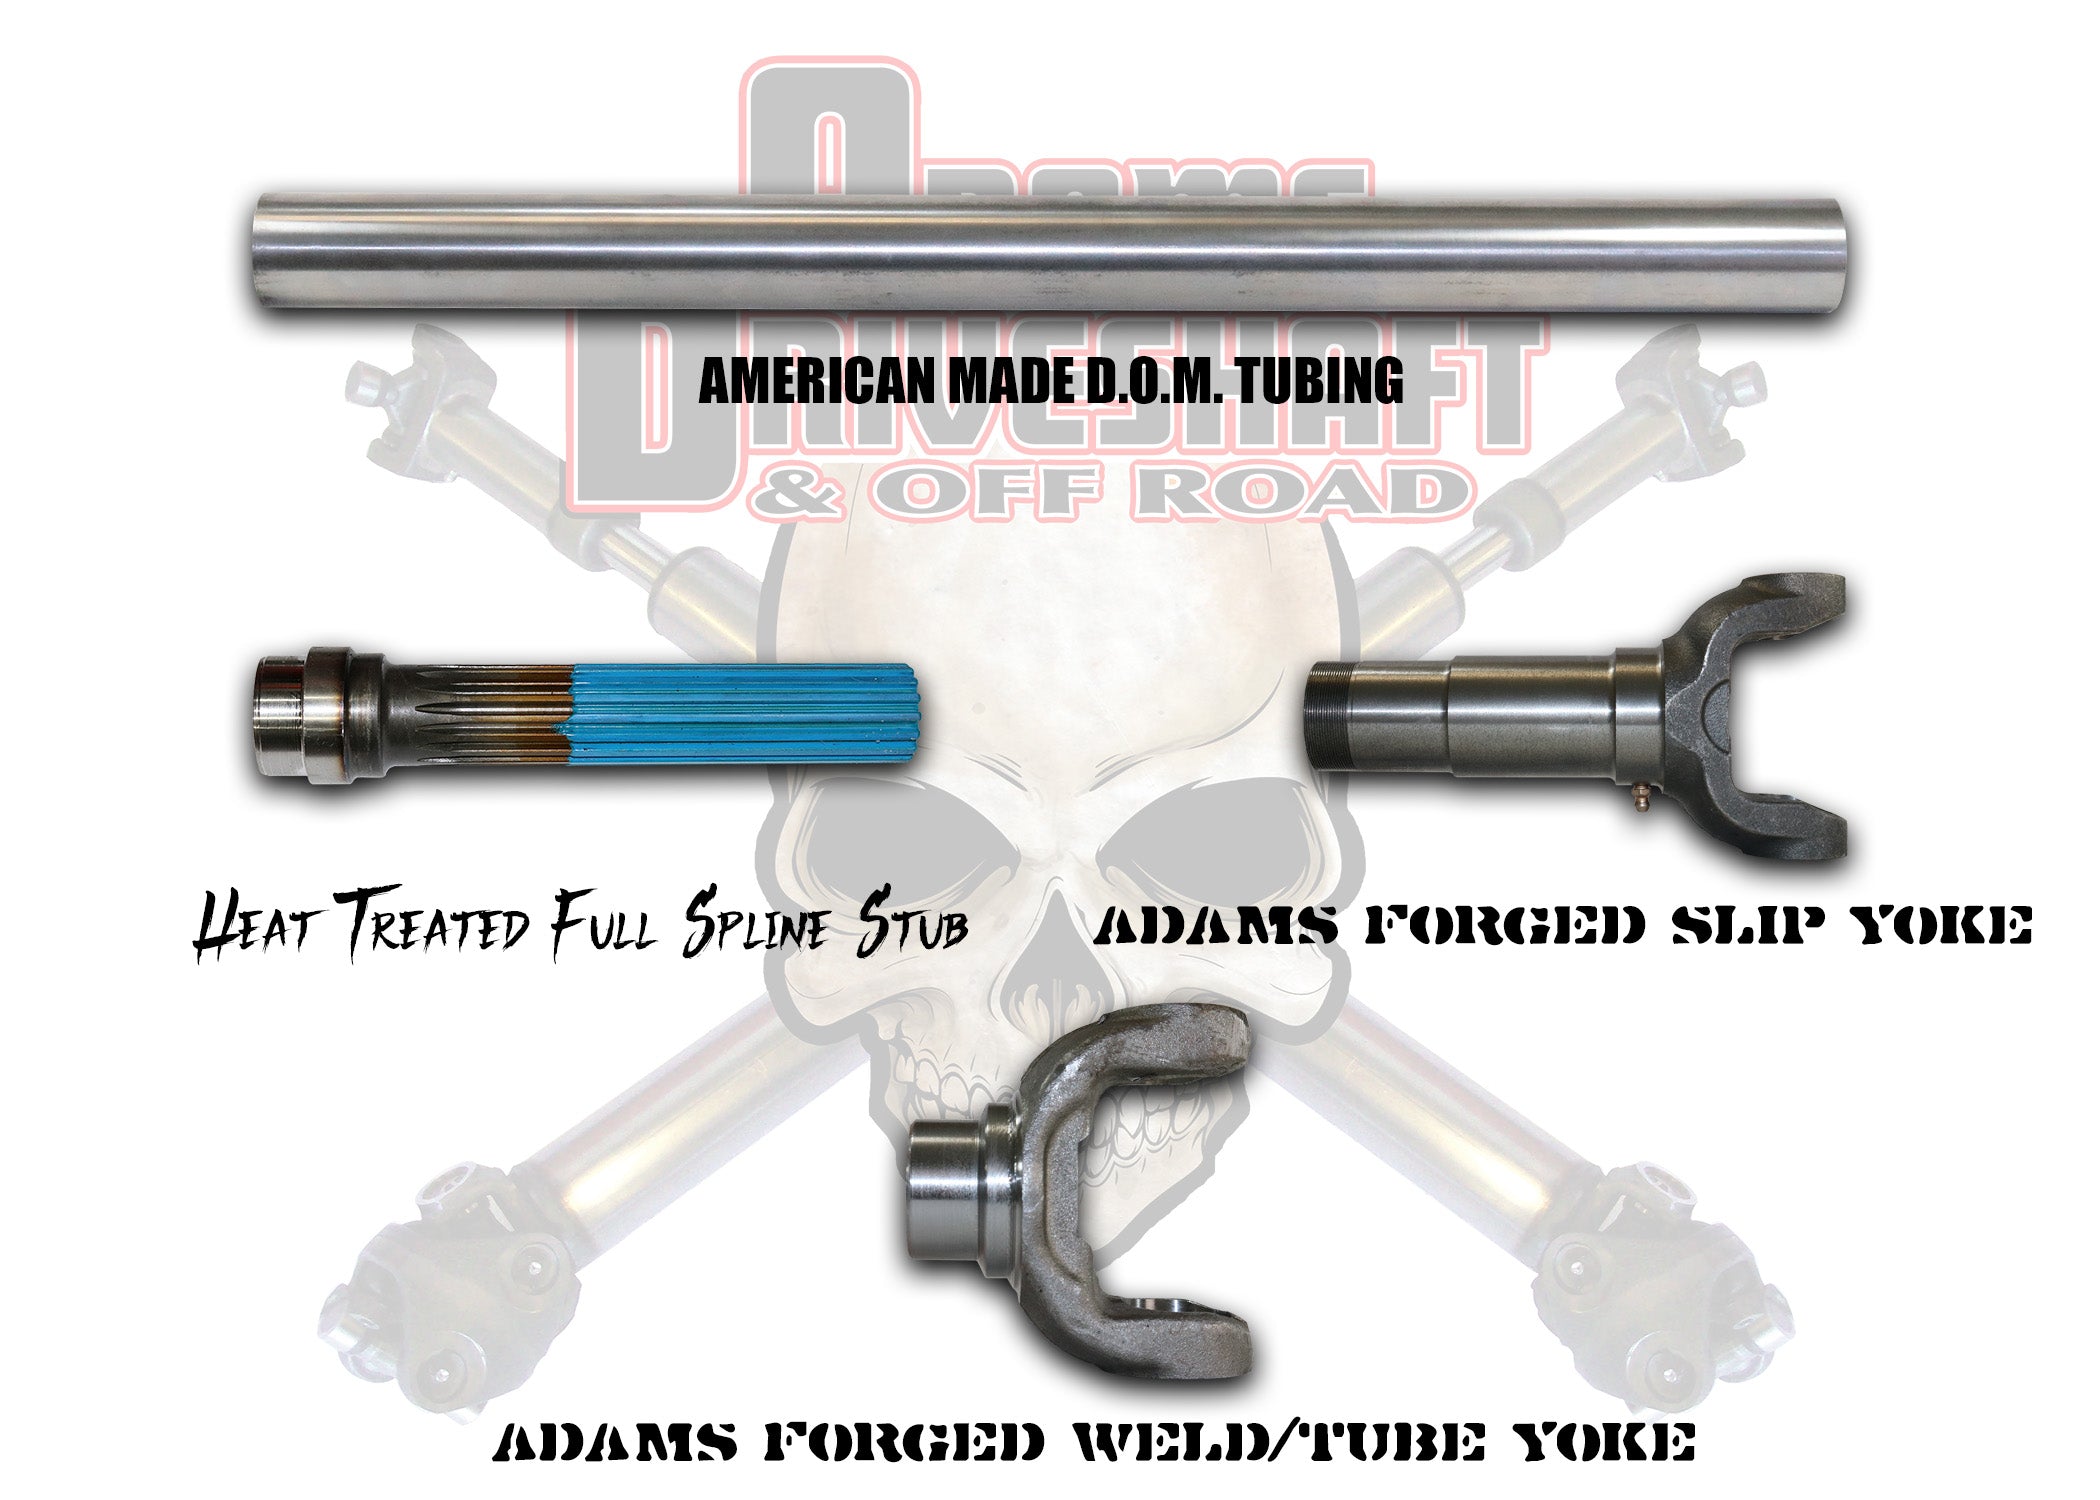 Adams Driveshaft's Build your Own - DIY - Offroad Buggy, Jeep Driveshaft, Etc. in 1410 Series - 0